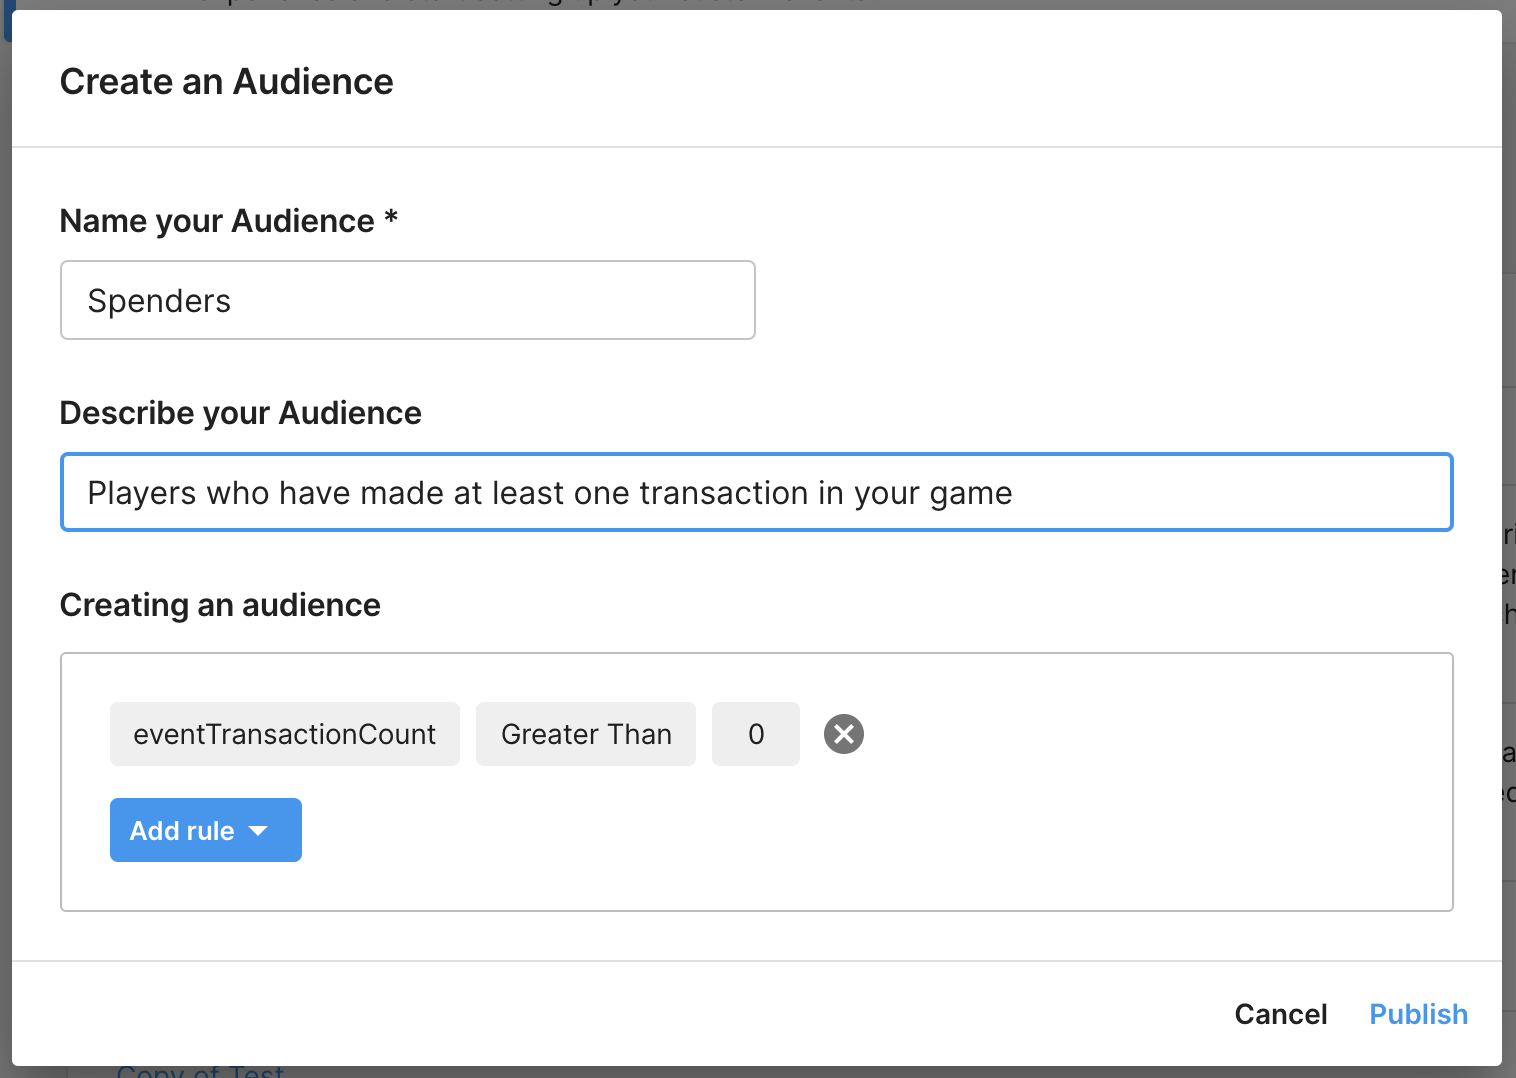 Audience defined as players who have made at least one transaction in your game.